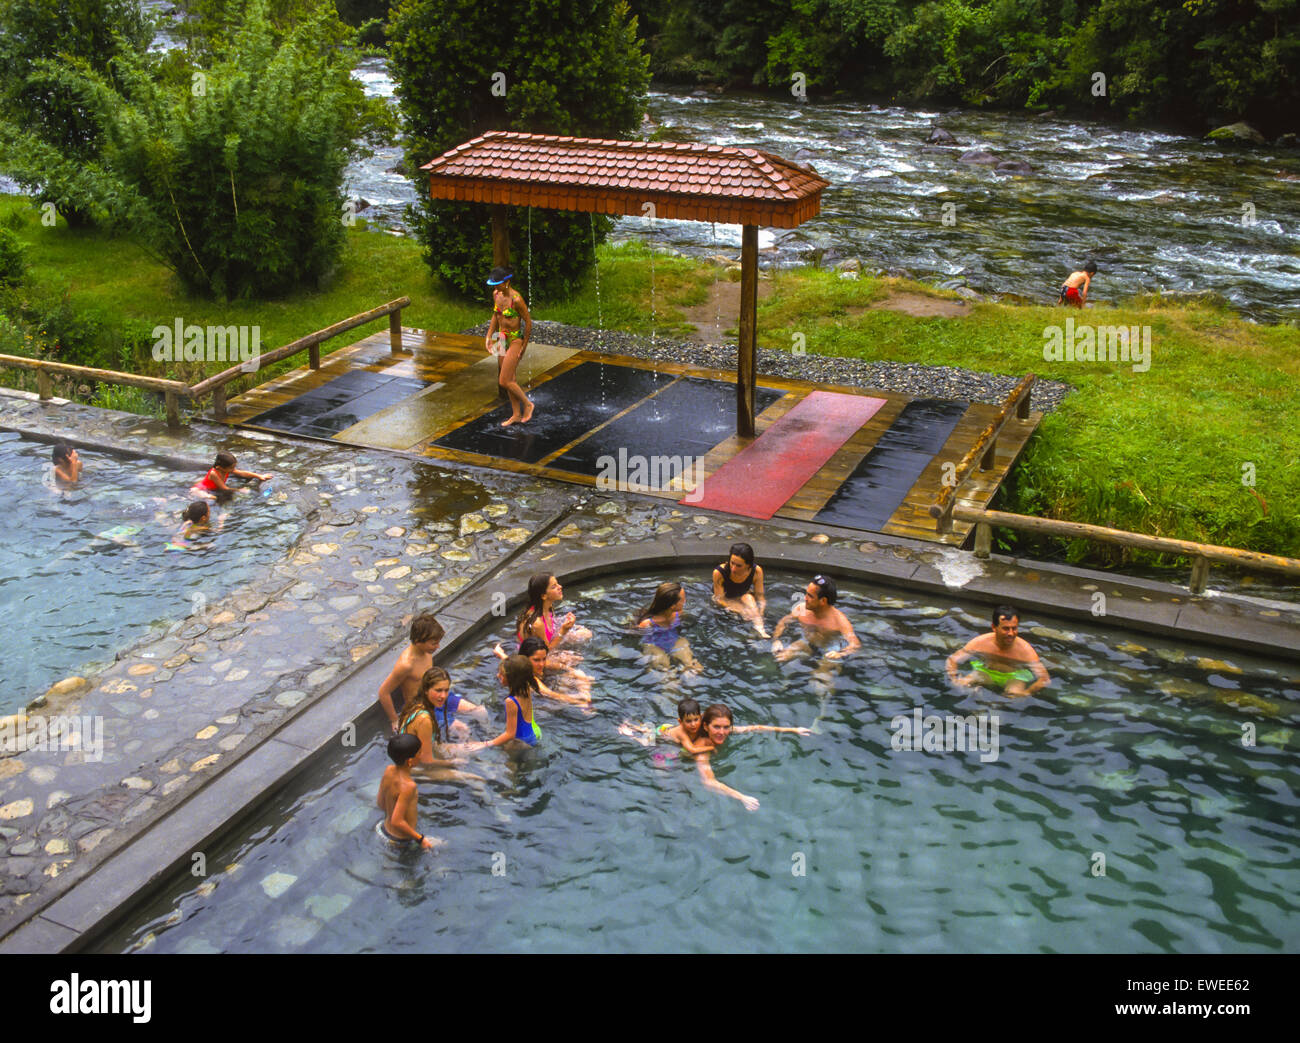 PUCON, CHILE - People in swimming pool at Huife geothermal hot springs by river, in Lake District Stock Photo